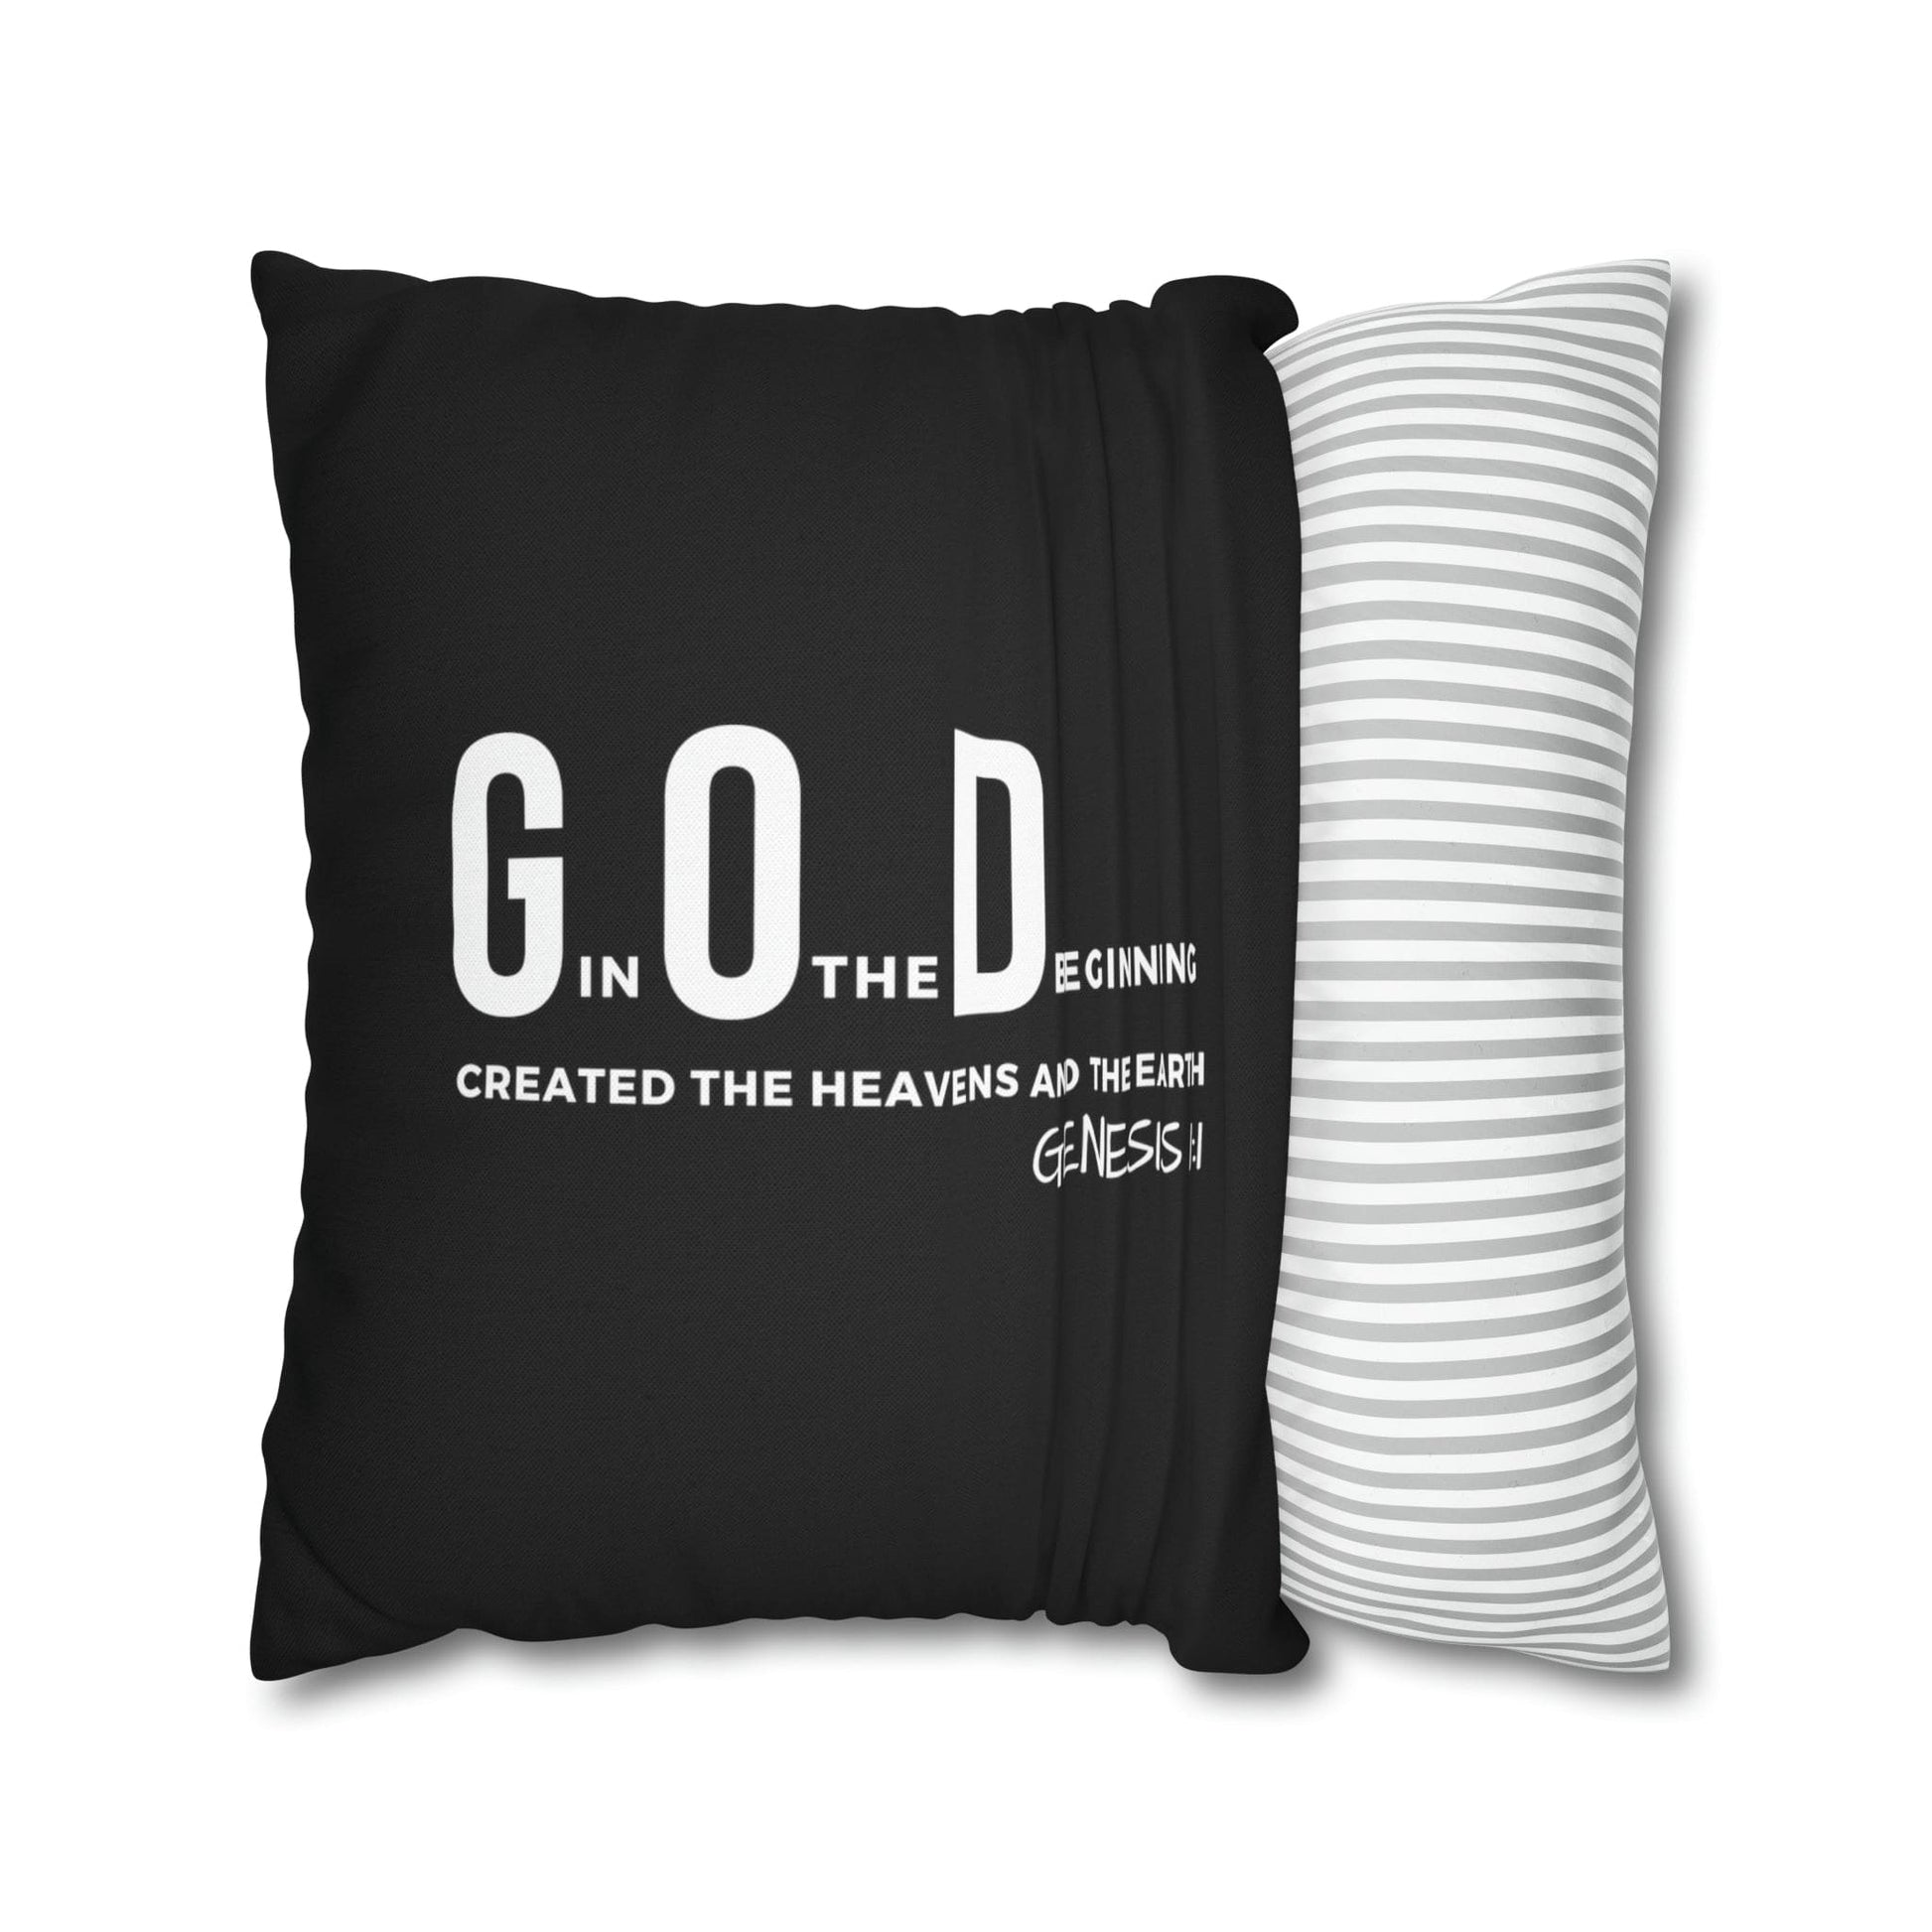 Decorative Throw Pillow Cover - Set Of 2, God In The Beginning Created The Heavens And The Earth - Scripture Verse-4